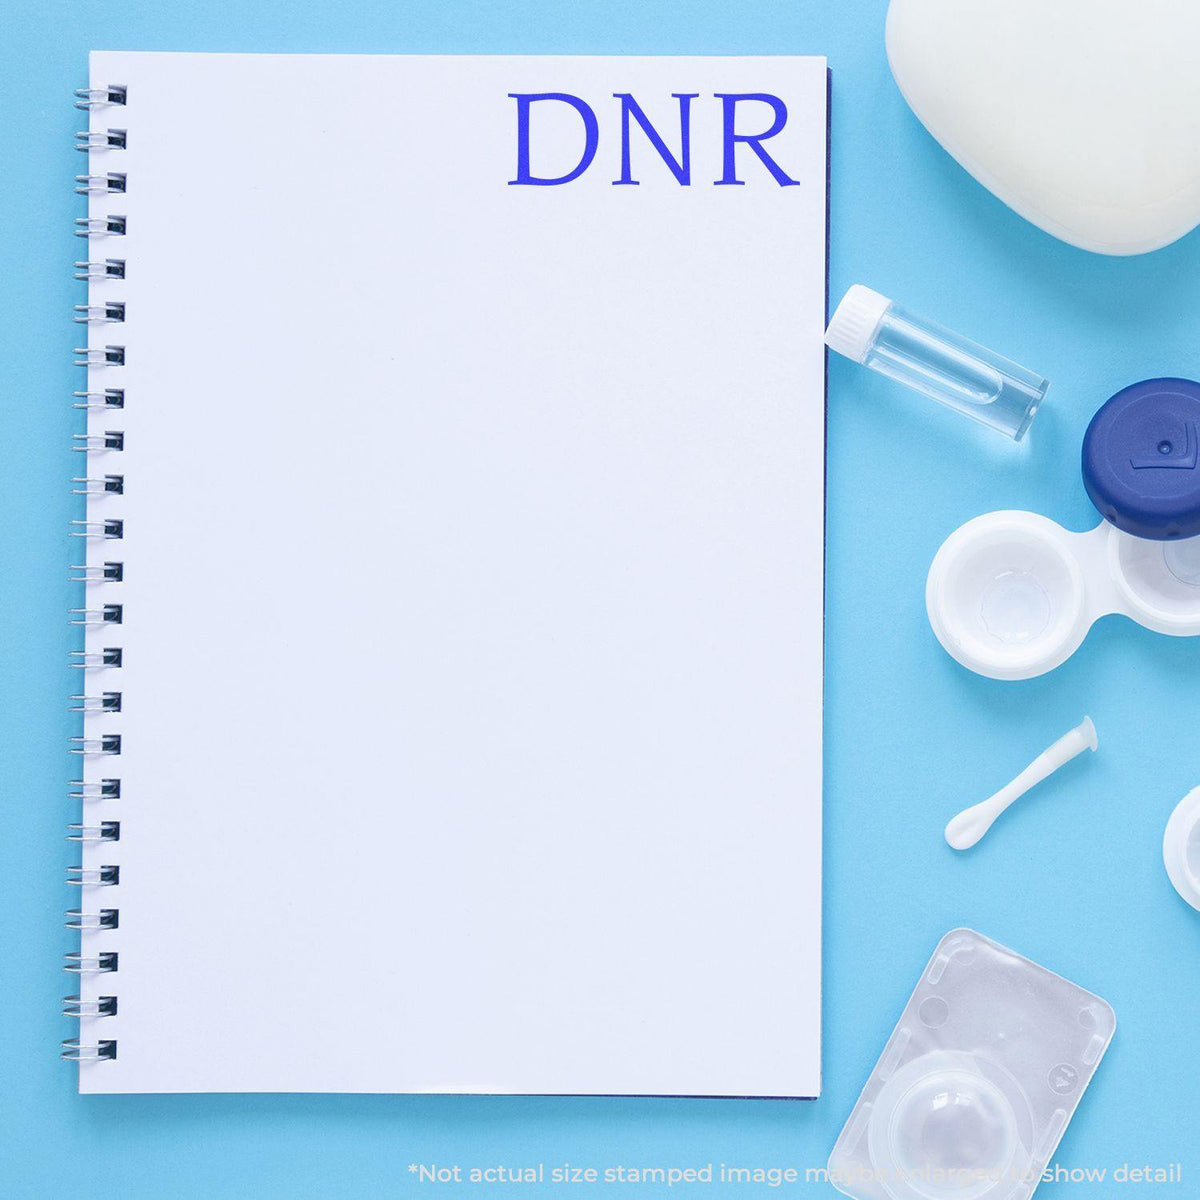 In Use Dnr Medical Rubber Stamp Image